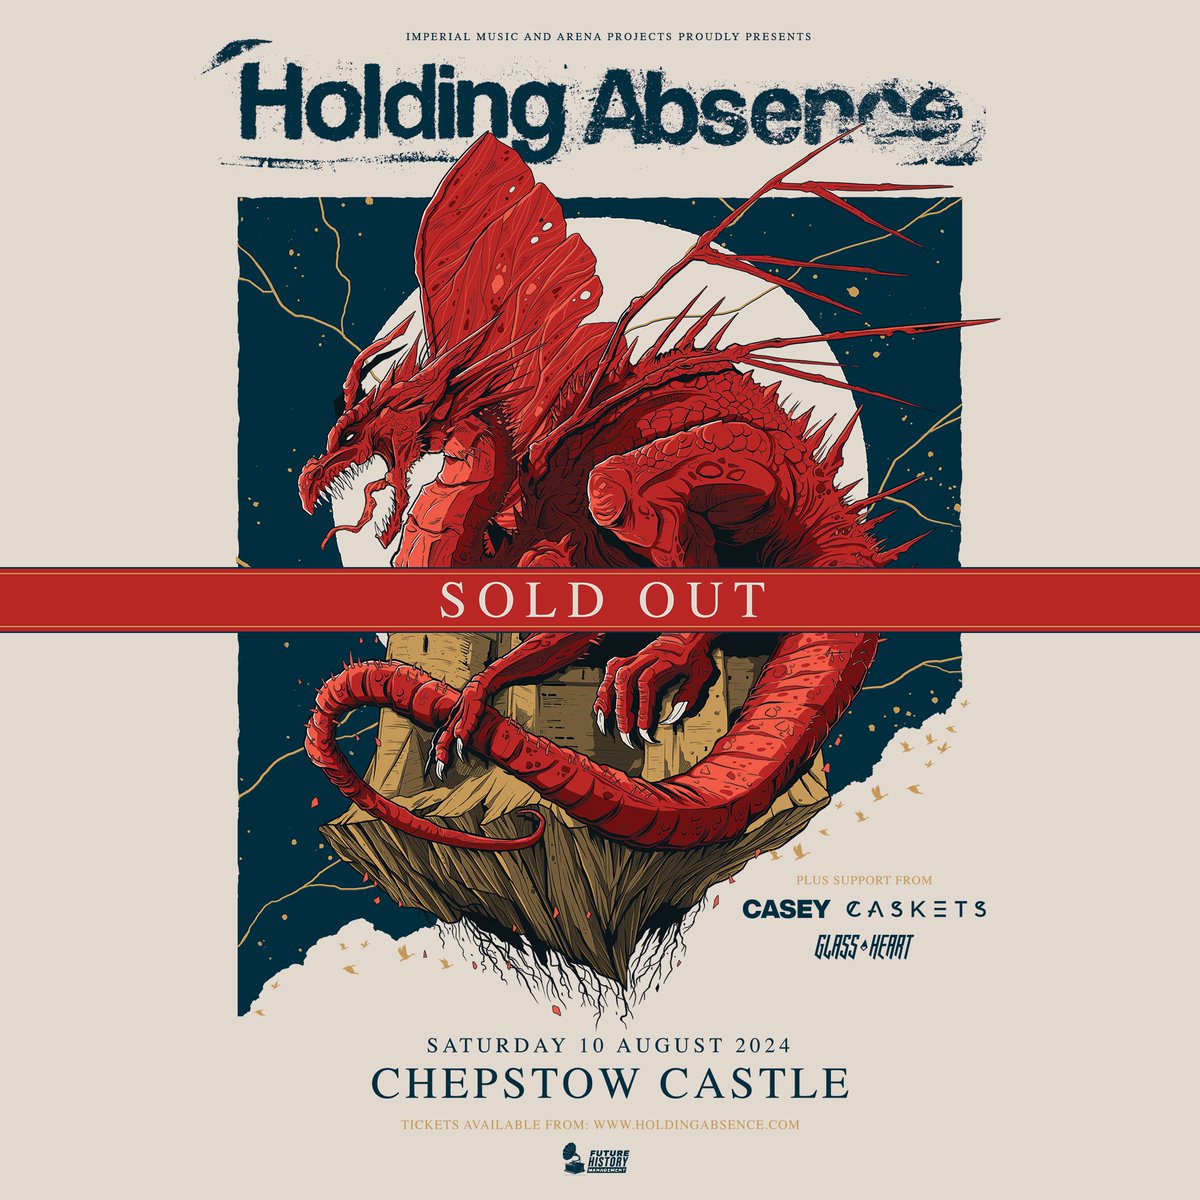 In an amendment to our previous post, we’re a little bit blown away to share that you guys sold out Chepstow Castle in less than 2 minutes!! 🤯 Thank you SO much for your support, and congrats to everyone who managed to secure a ticket. 🏴󠁧󠁢󠁷󠁬󠁳󠁿 🏰